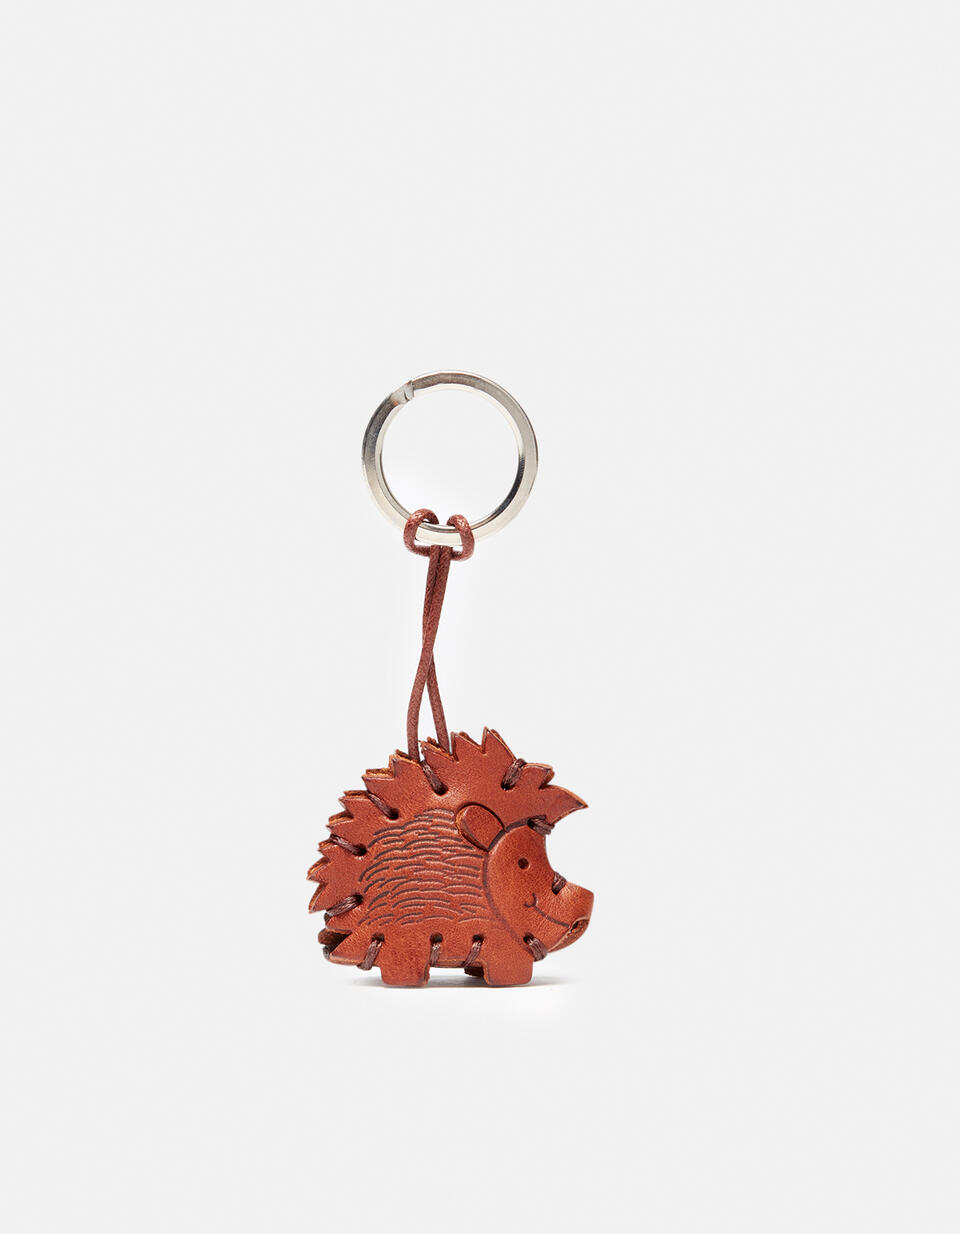 Curly leather keyring - Key holders - Women's Accessories | Accessories  - Key holders - Women's Accessories | AccessoriesCuoieria Fiorentina